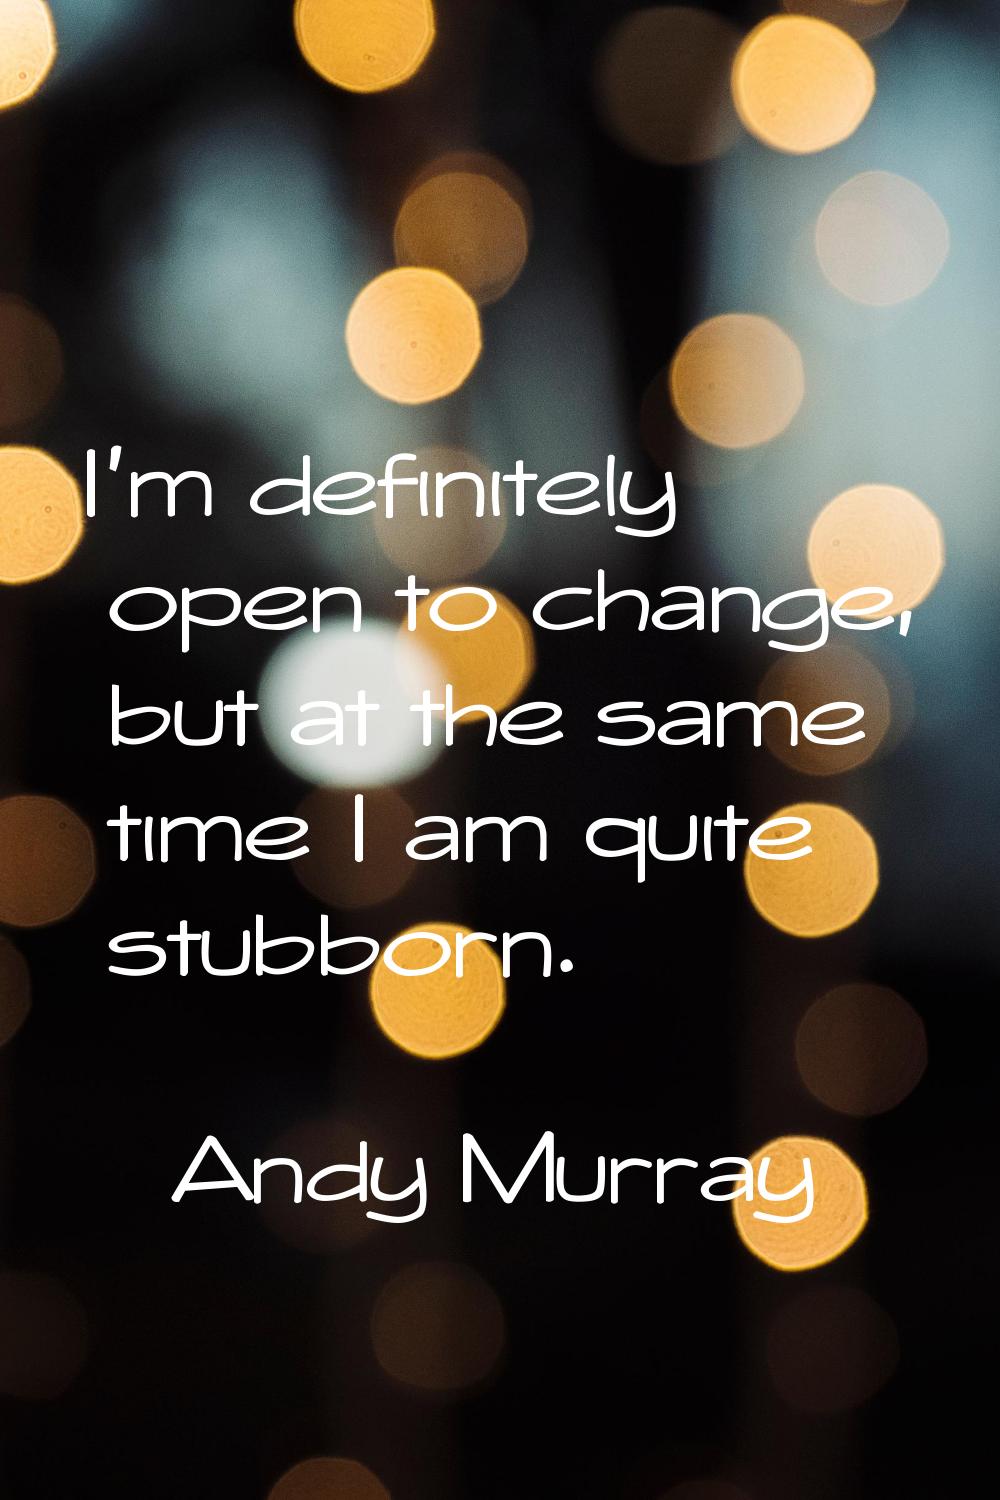 I'm definitely open to change, but at the same time I am quite stubborn.